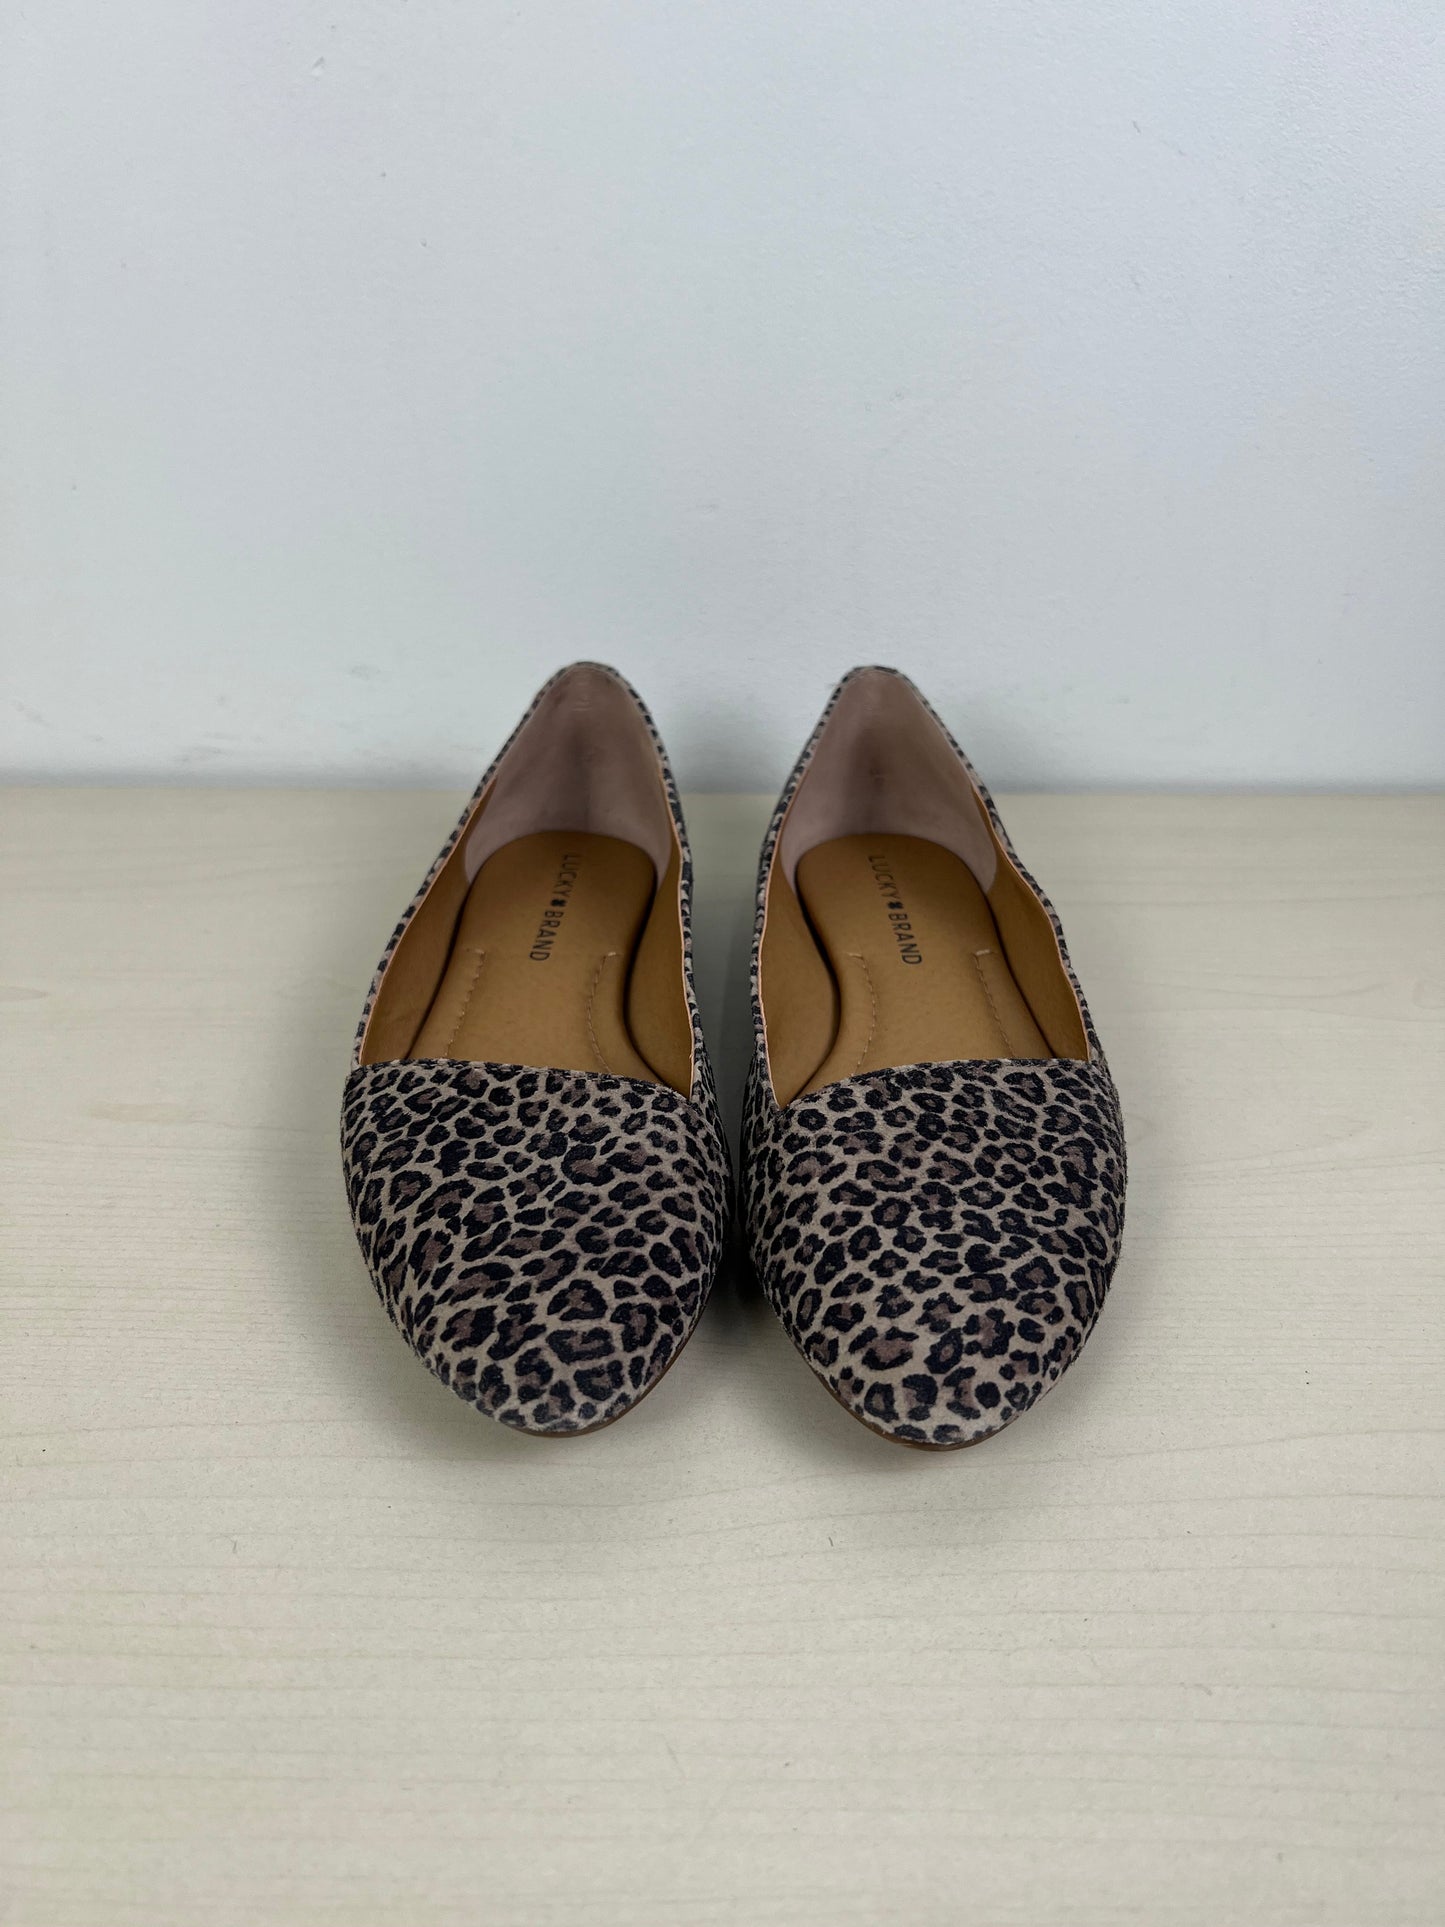 Animal Print Shoes Flats Lucky Brand, Size 6.5